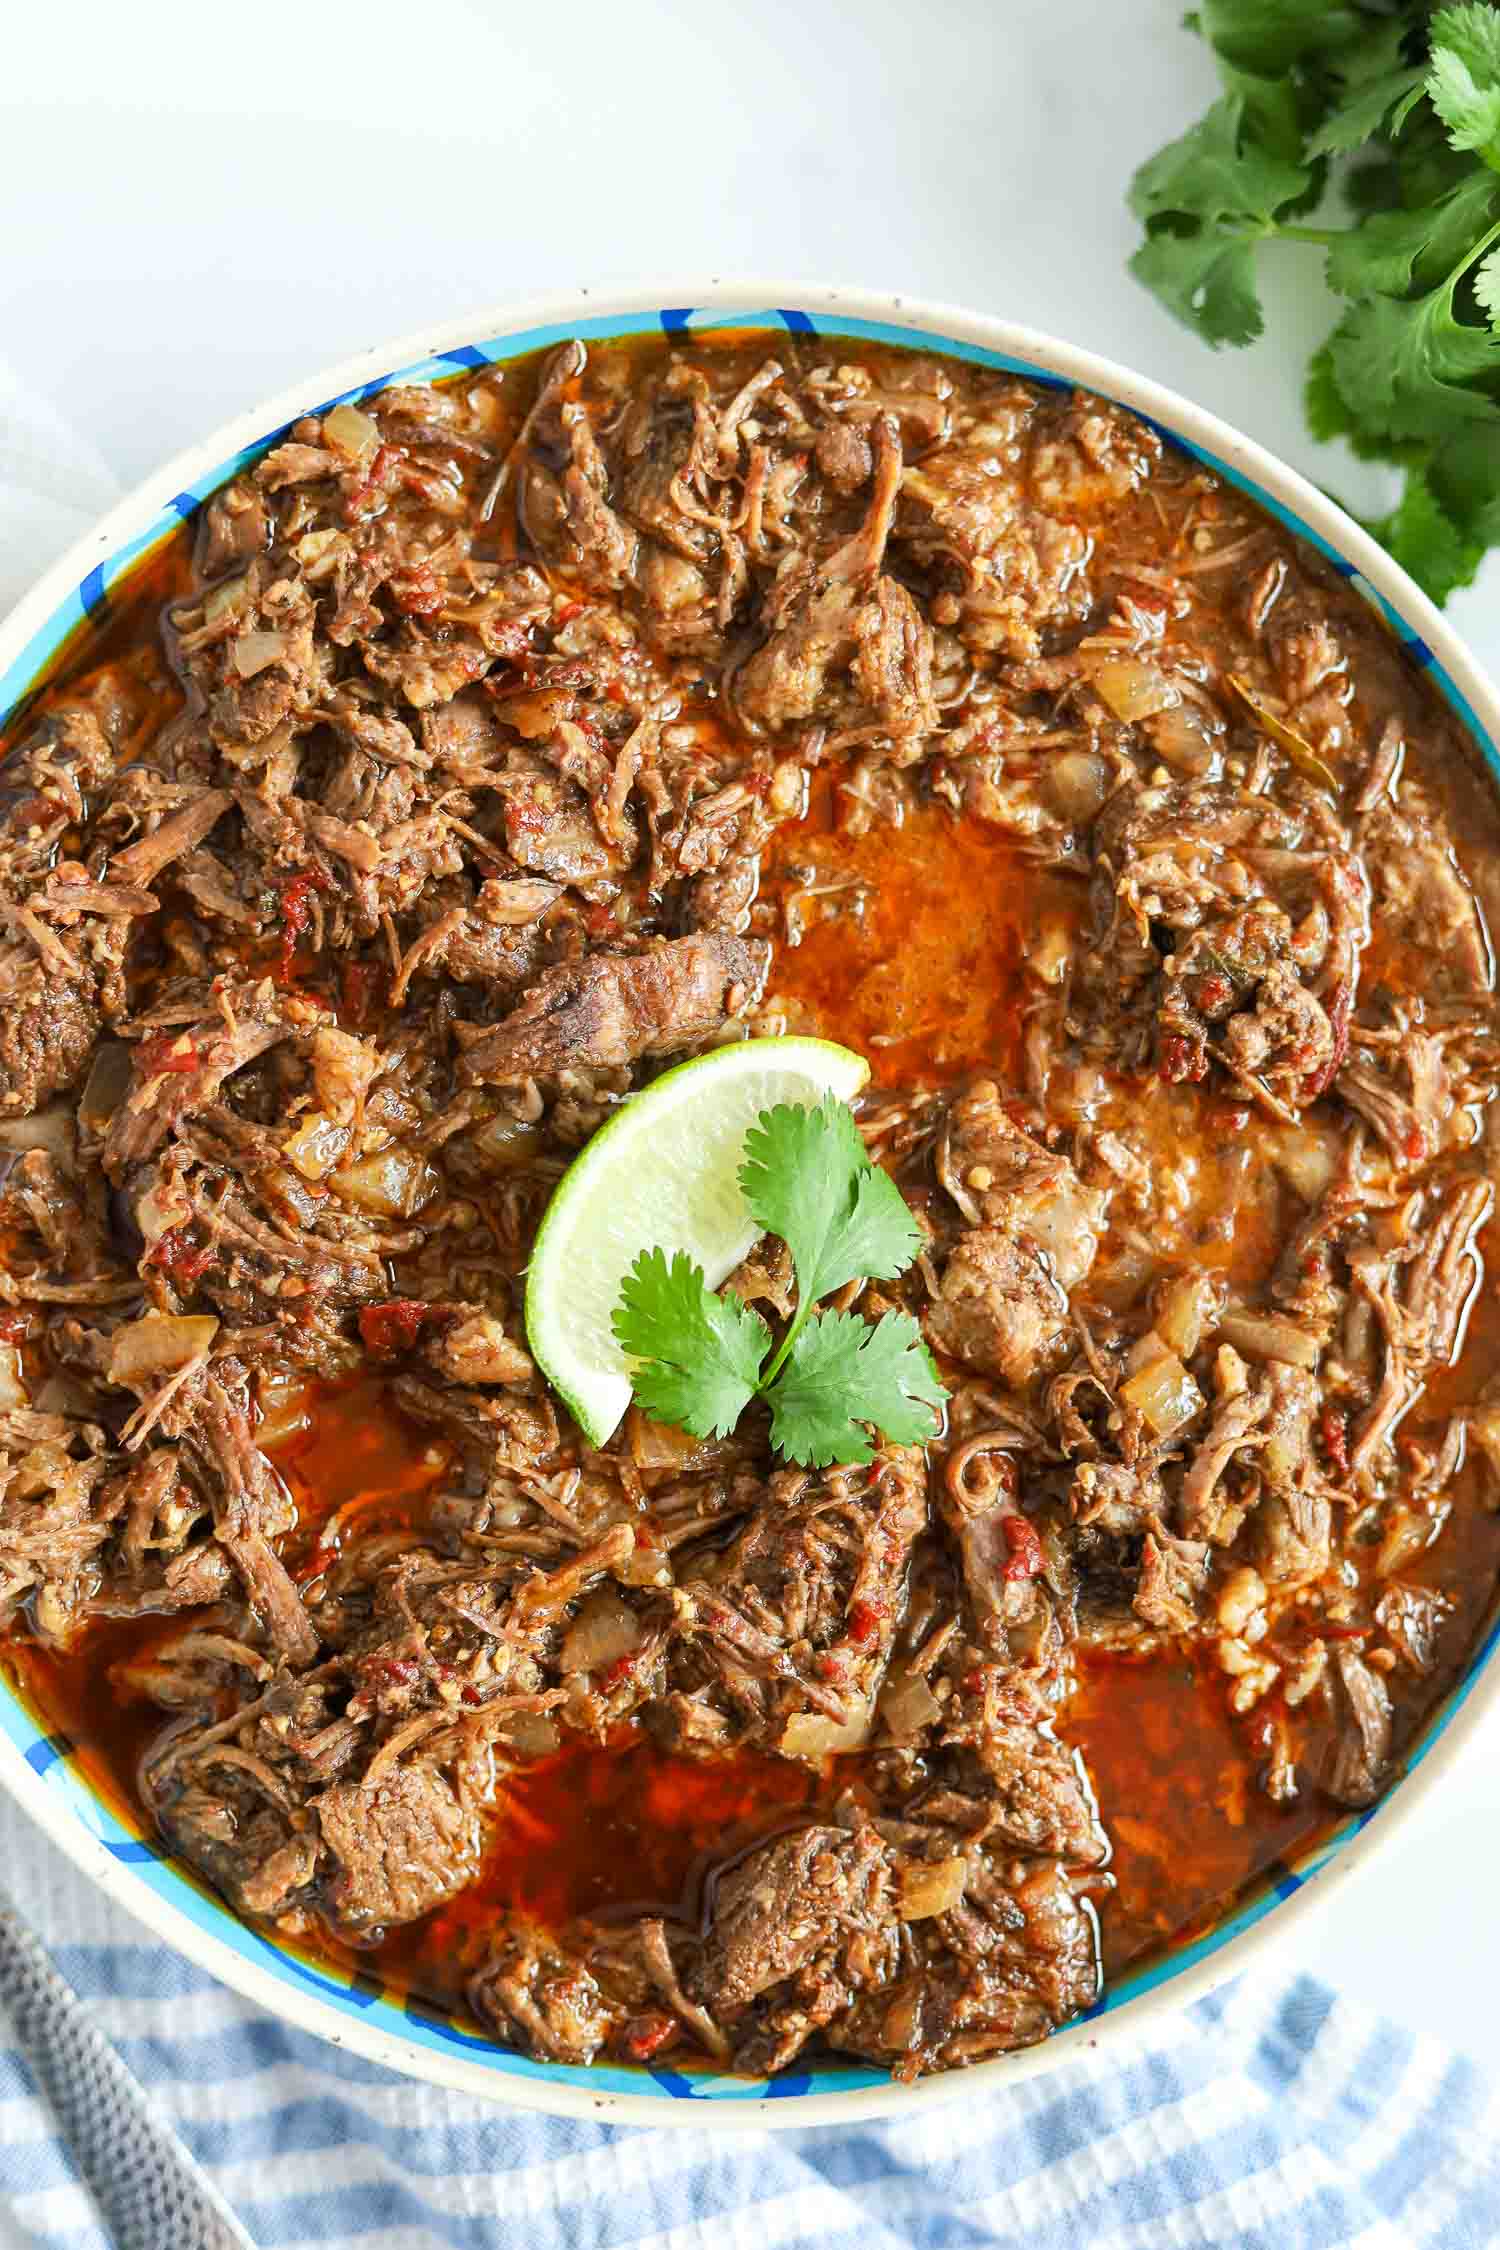 Chipotle shredded beef